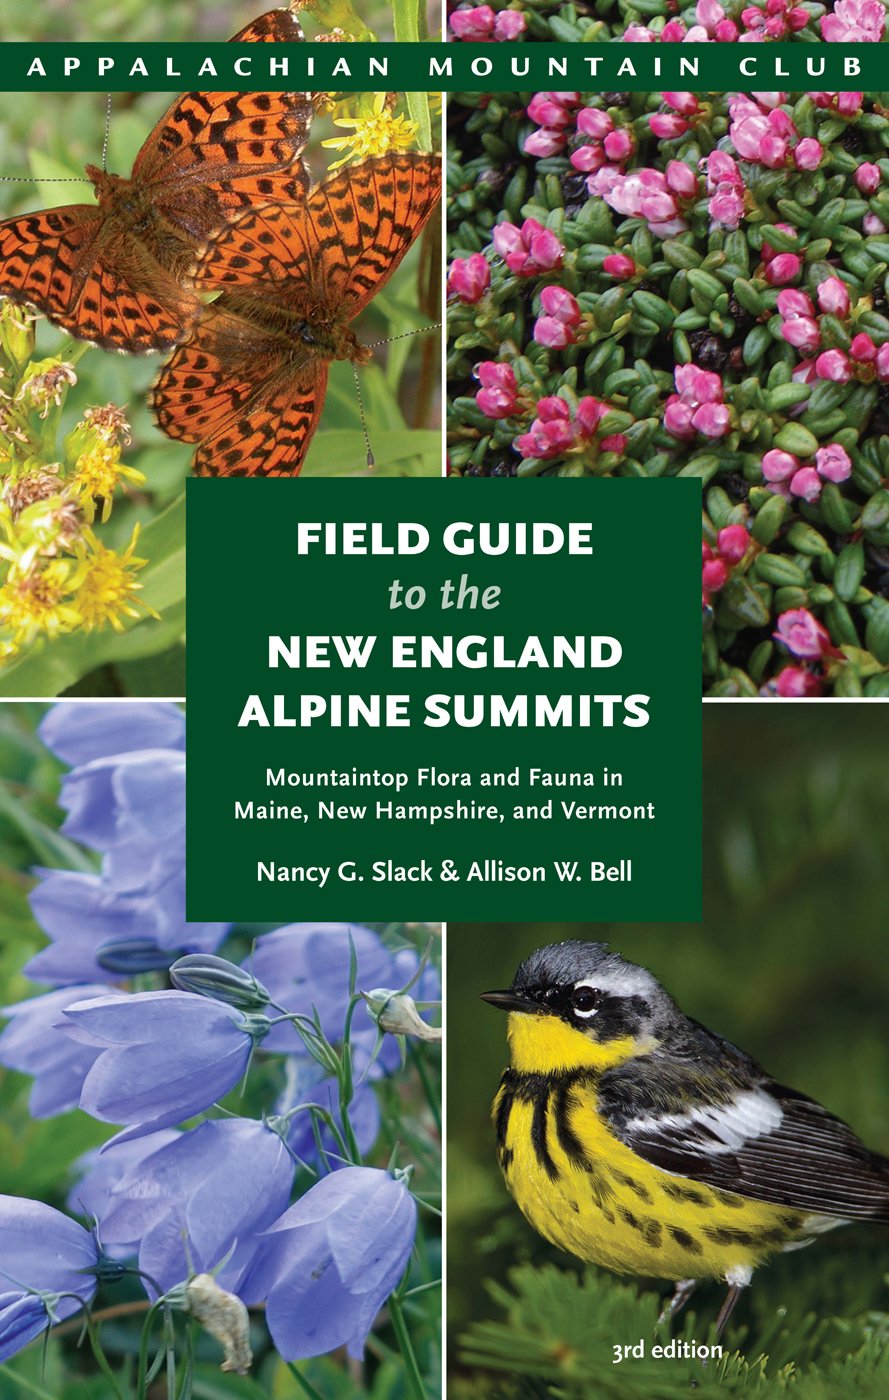 Field Guide to the New England Alpine Summits, 3rd Edition